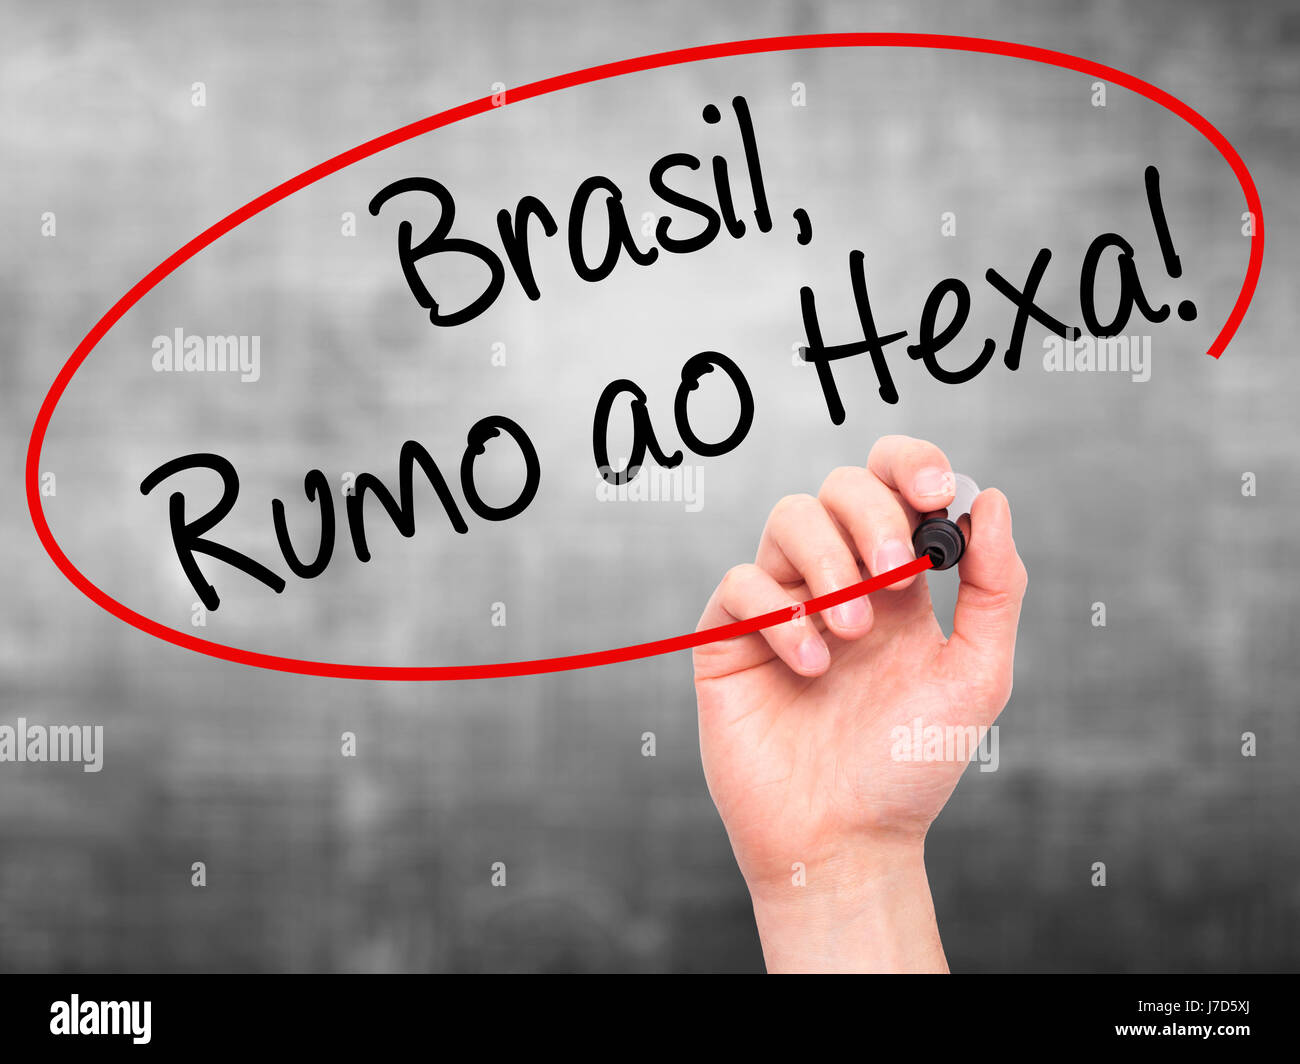 Man Hand writing Brasil, Rumo ao Hexa! with black marker on visual screen. Isolated on background. Business, technology, internet concept. Stock Photo Stock Photo